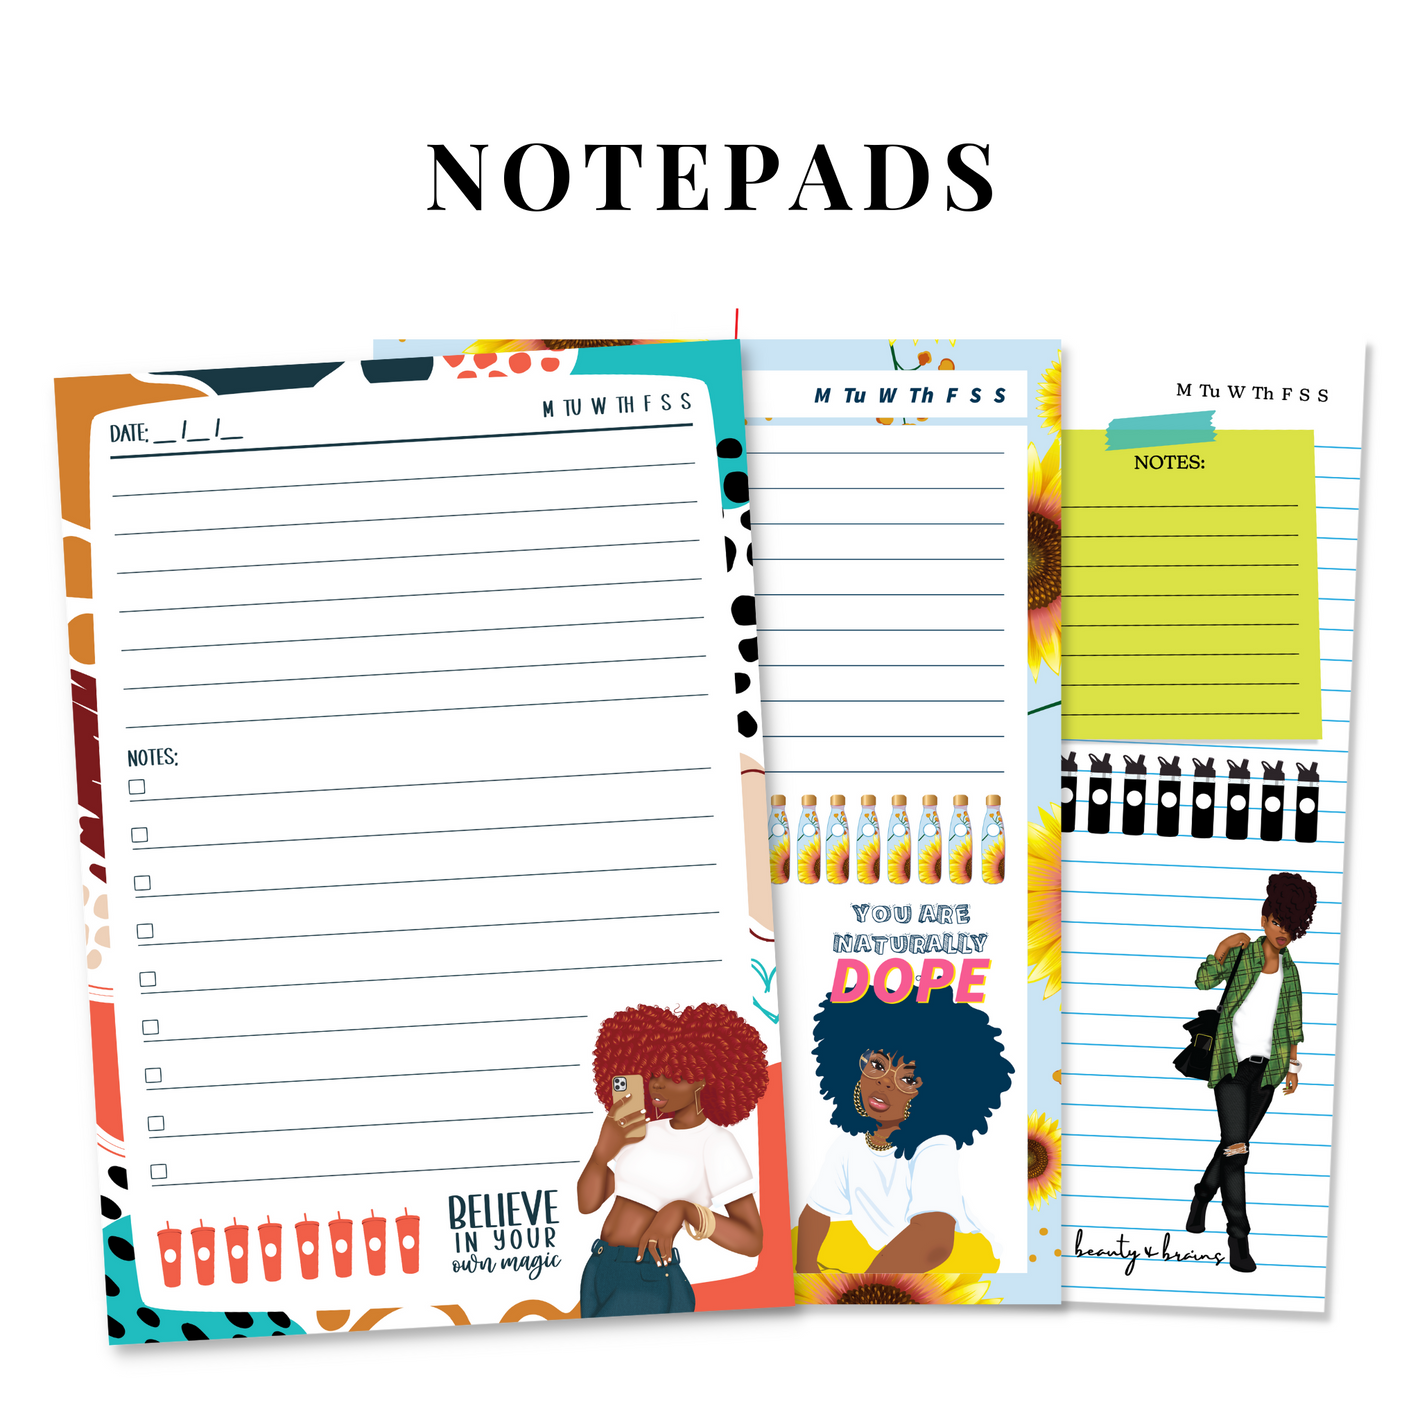 Cute stationery daily to do notepads for Black women who love to plan and organize 